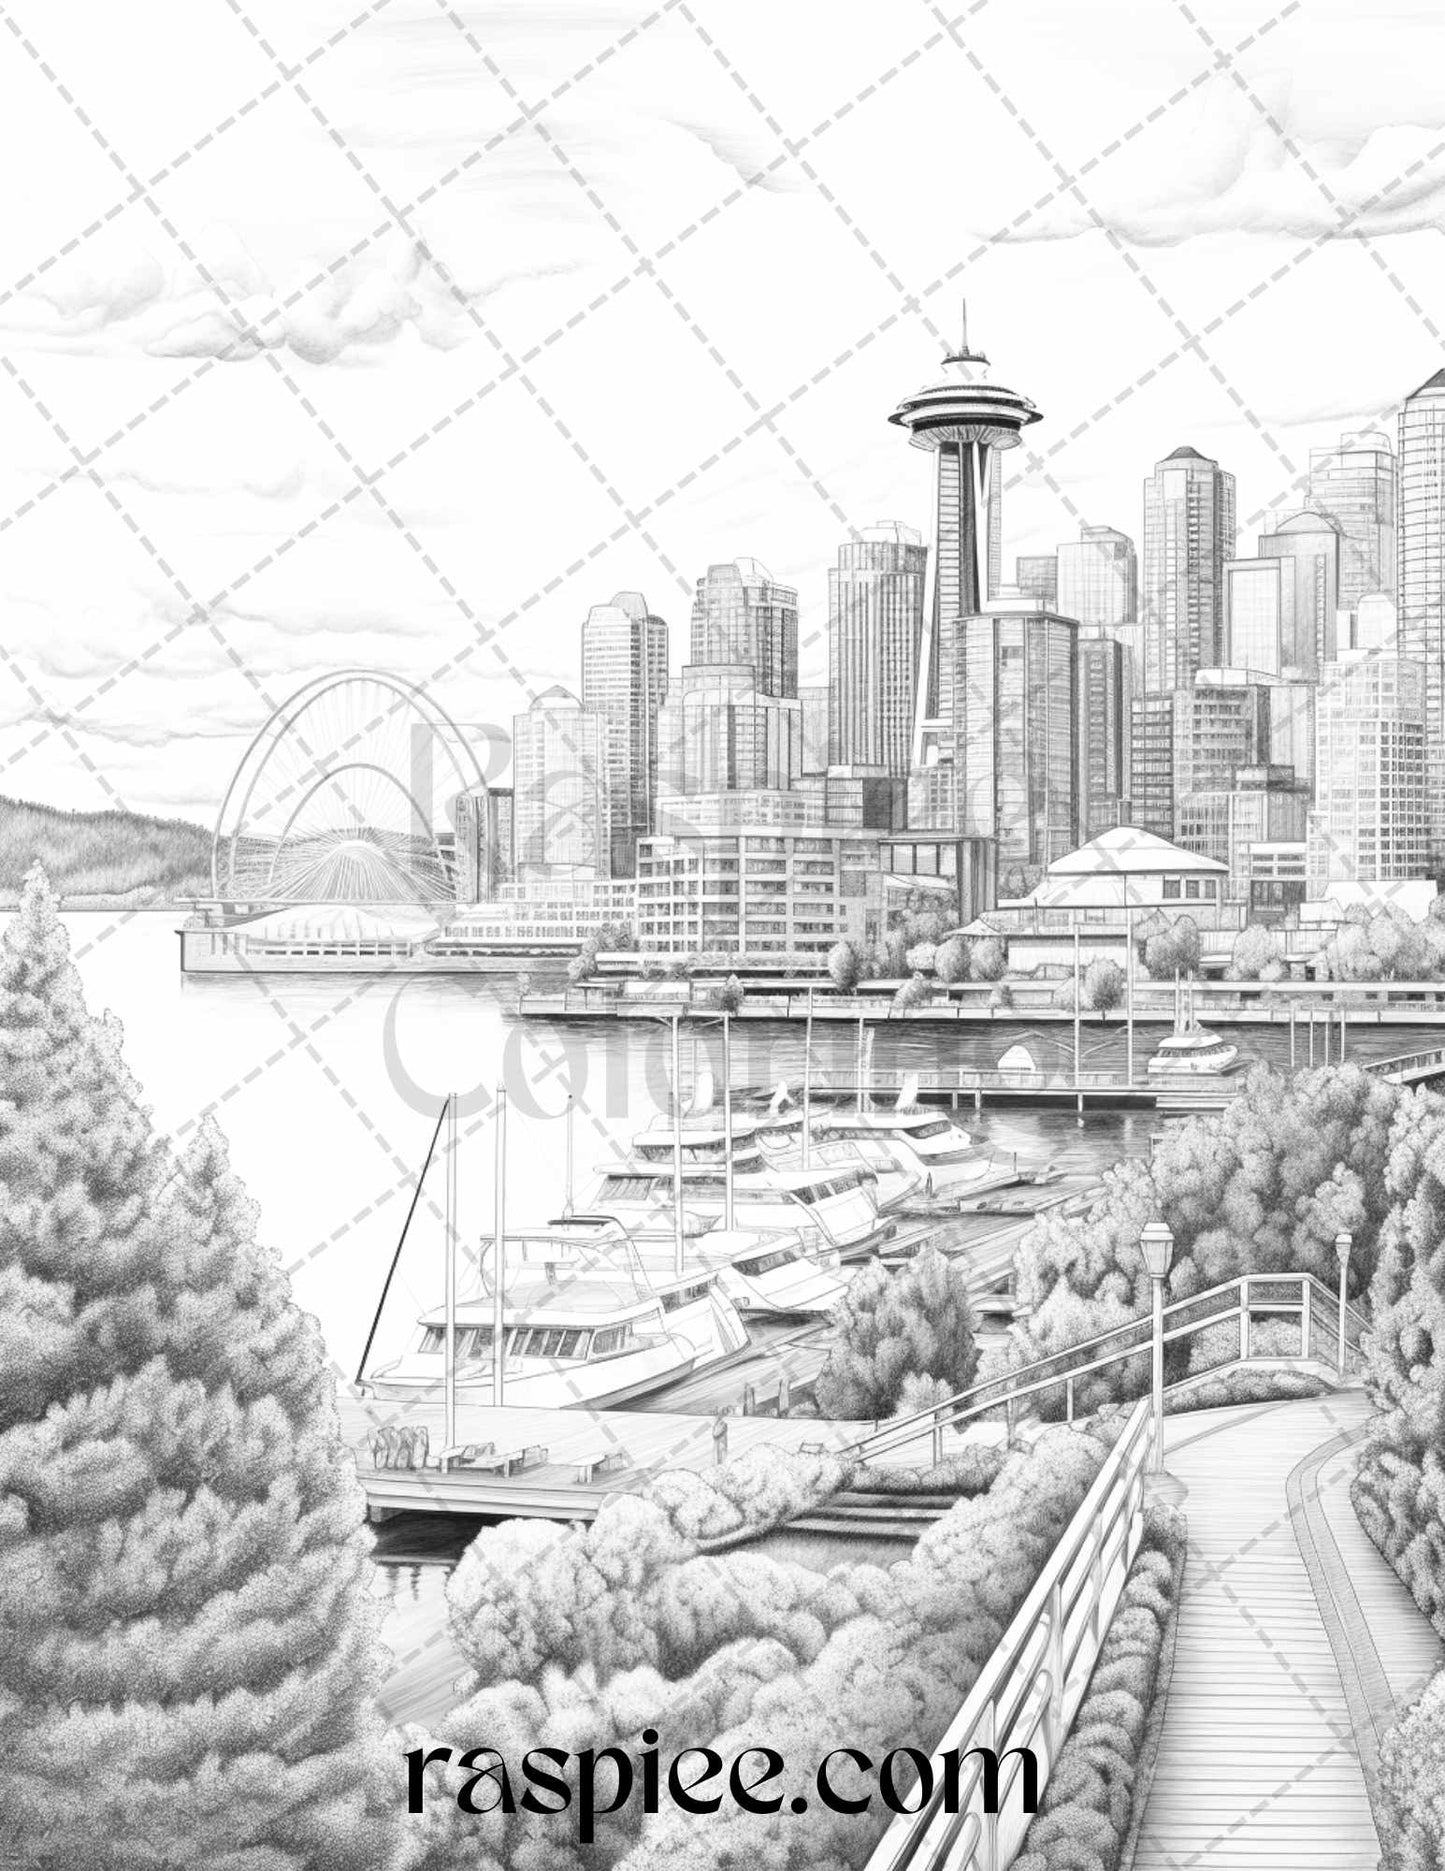 40 Beautiful Cities Travel Grayscale Coloring Pages Printable for Adults, PDF File Instant Download - raspiee